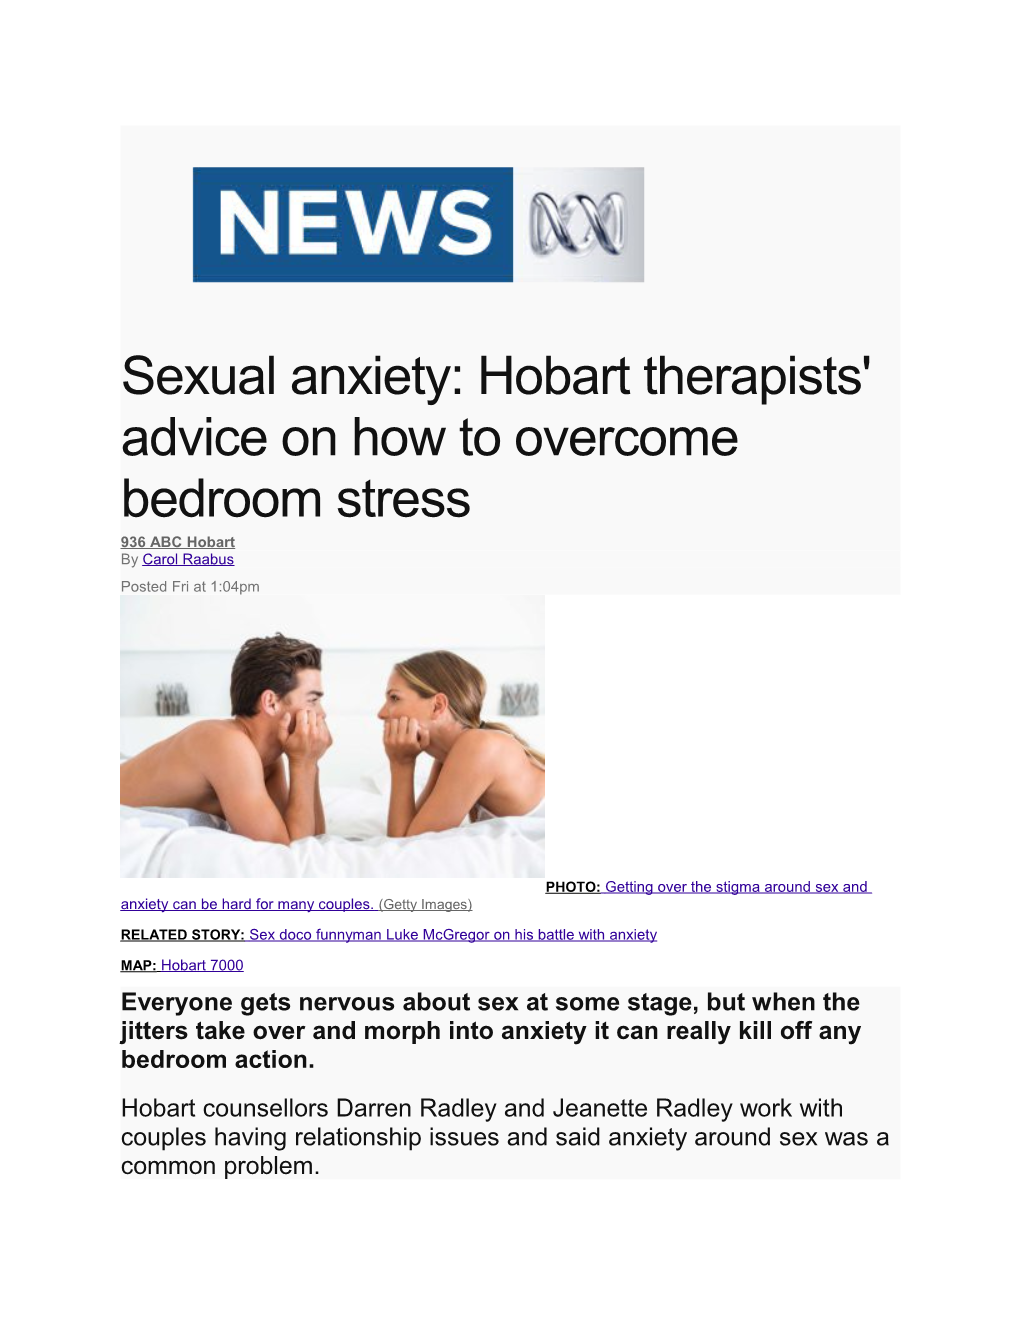 Sexual Anxiety: Hobart Therapists' Advice on How to Overcome Bedroom Stress